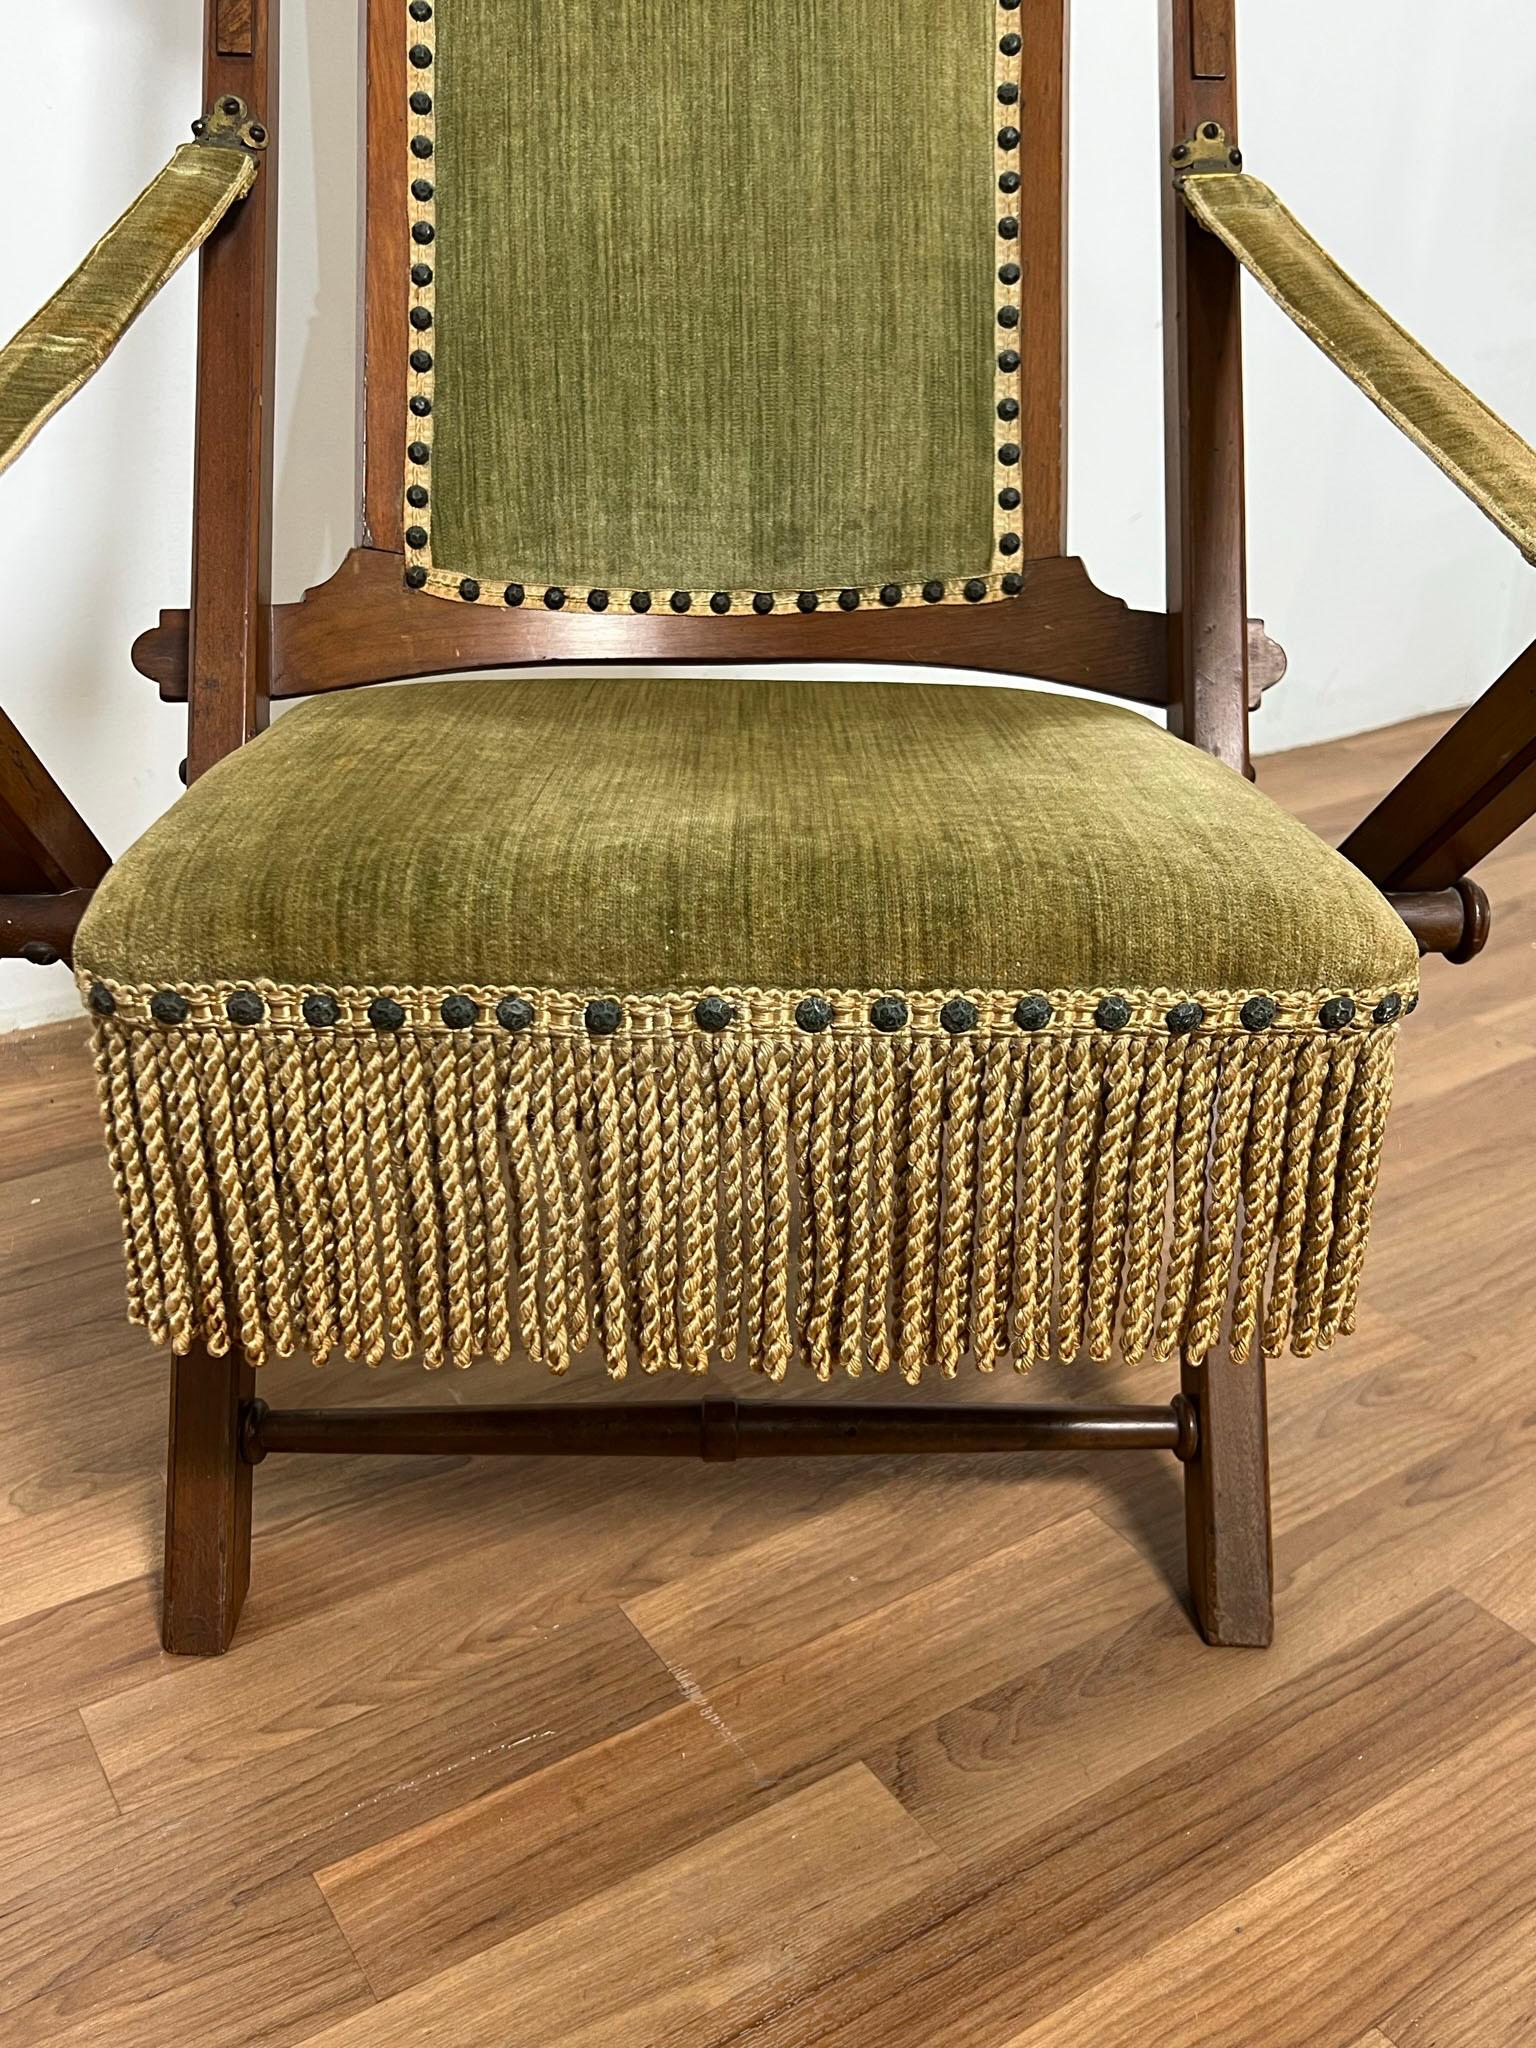 American Victorian Era Campaign Chair with Lidded Ottoman, circa 1890s For Sale